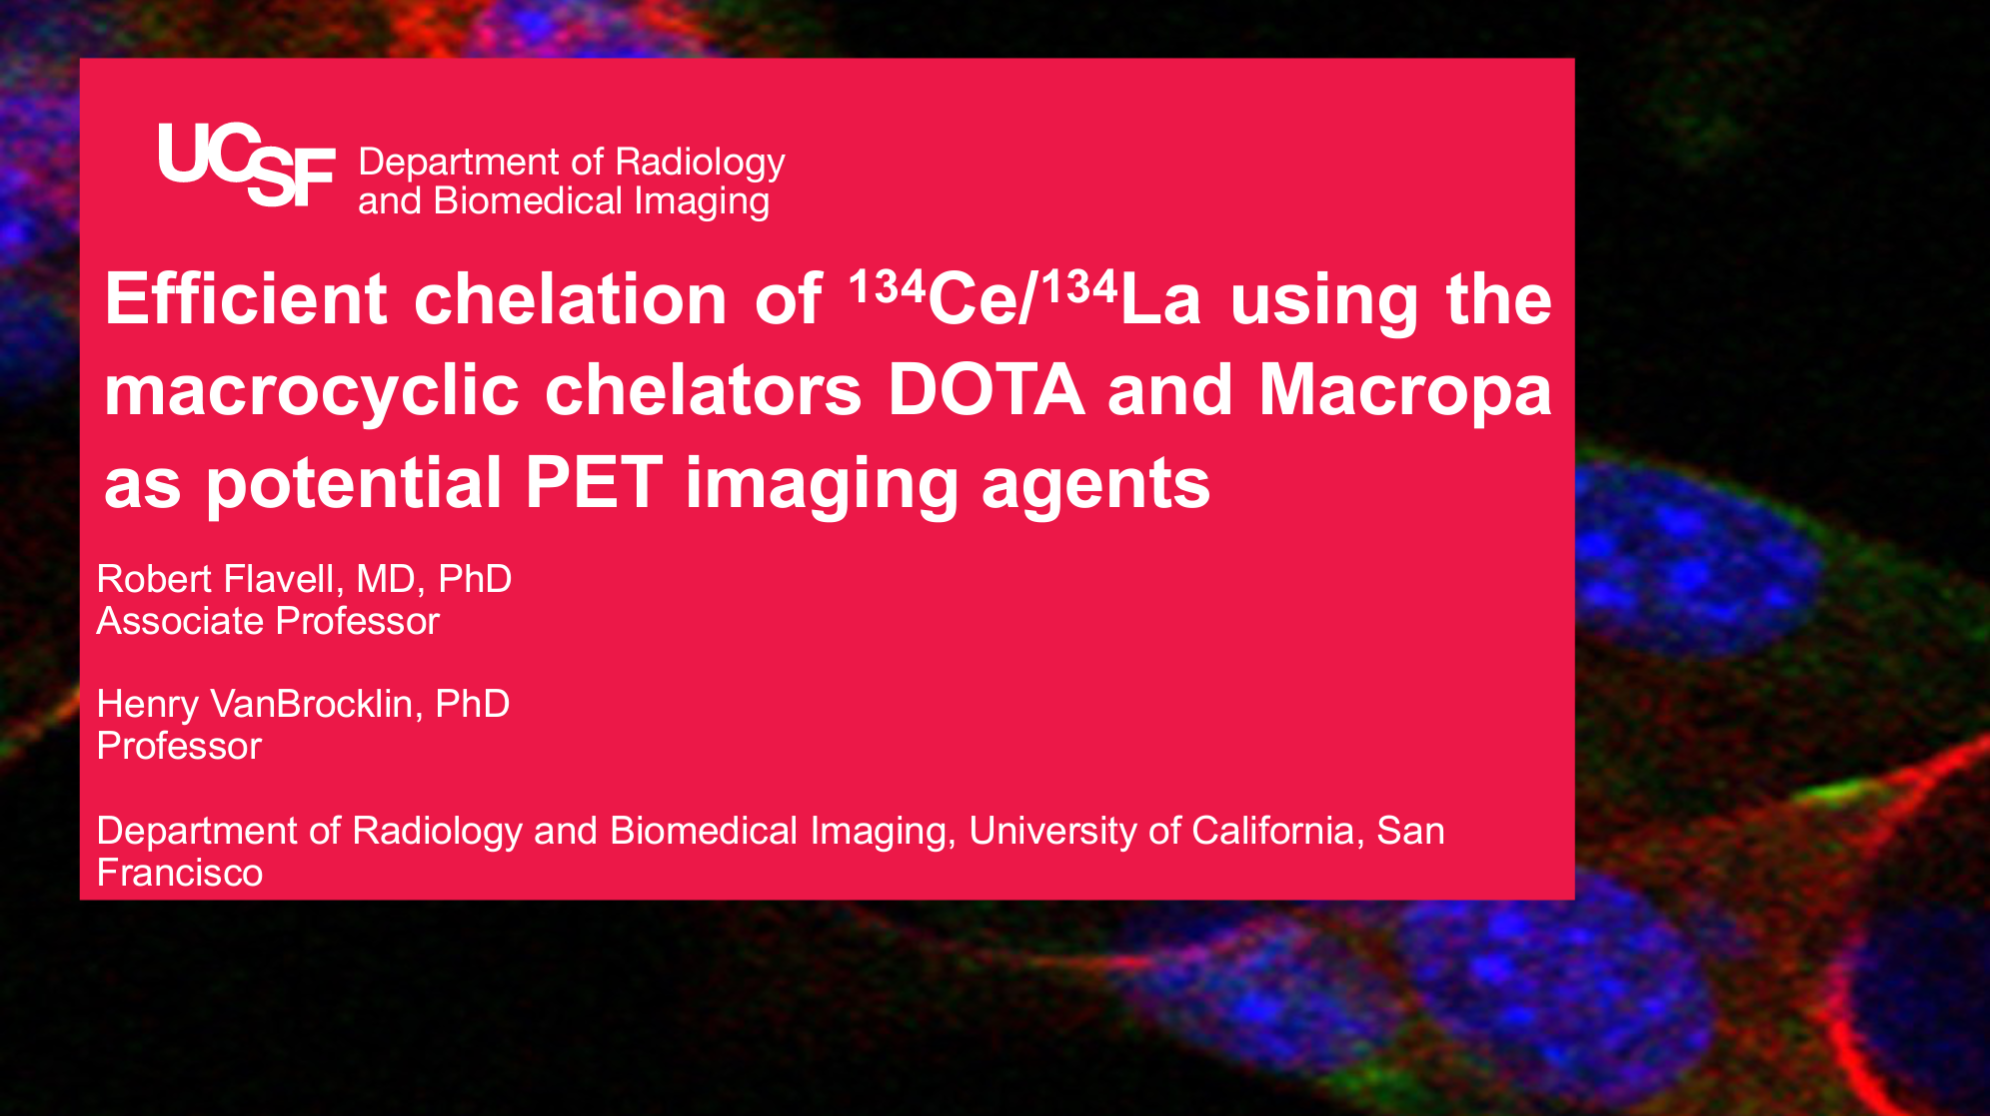 Efficient chelation of 134Ce/134La using the macrocyclic chelators DOTA and Macropa as potential PET imaging agents